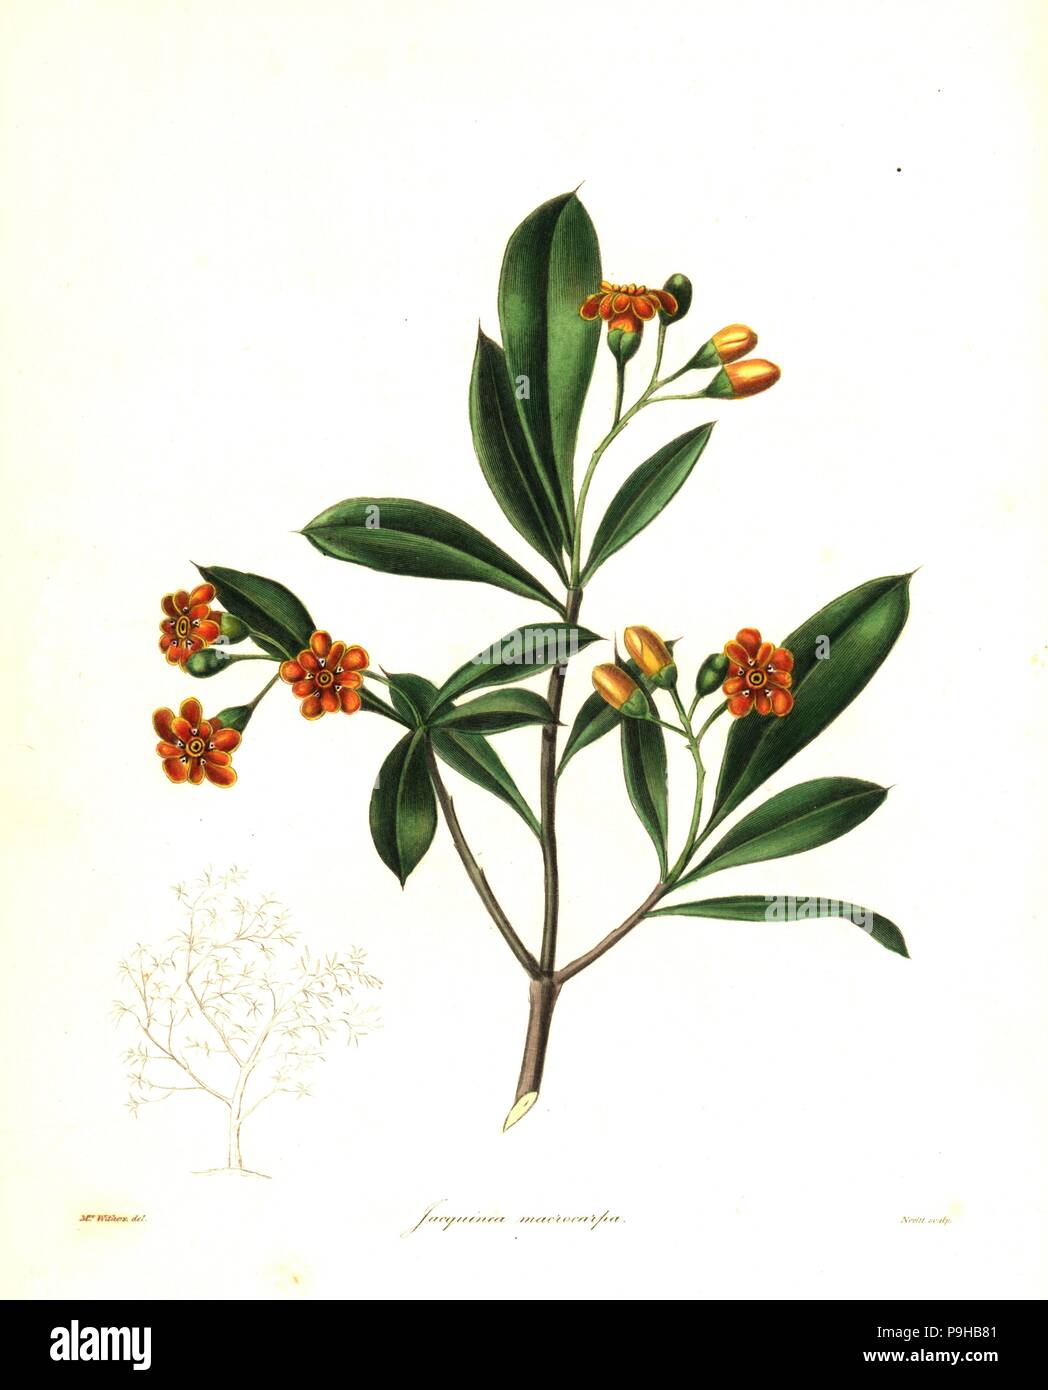 Cudjoe wood, Bonellia macrocarpa (Large capsuled jacquinia, Jacquinia macrocarpa). Handcoloured copperplate engraving by S. Nevitt after a botanical illustration by Mrs Augusta Withers from Benjamin Maund and the Rev. John Stevens Henslow's The Botanist, London, 1836. Stock Photo